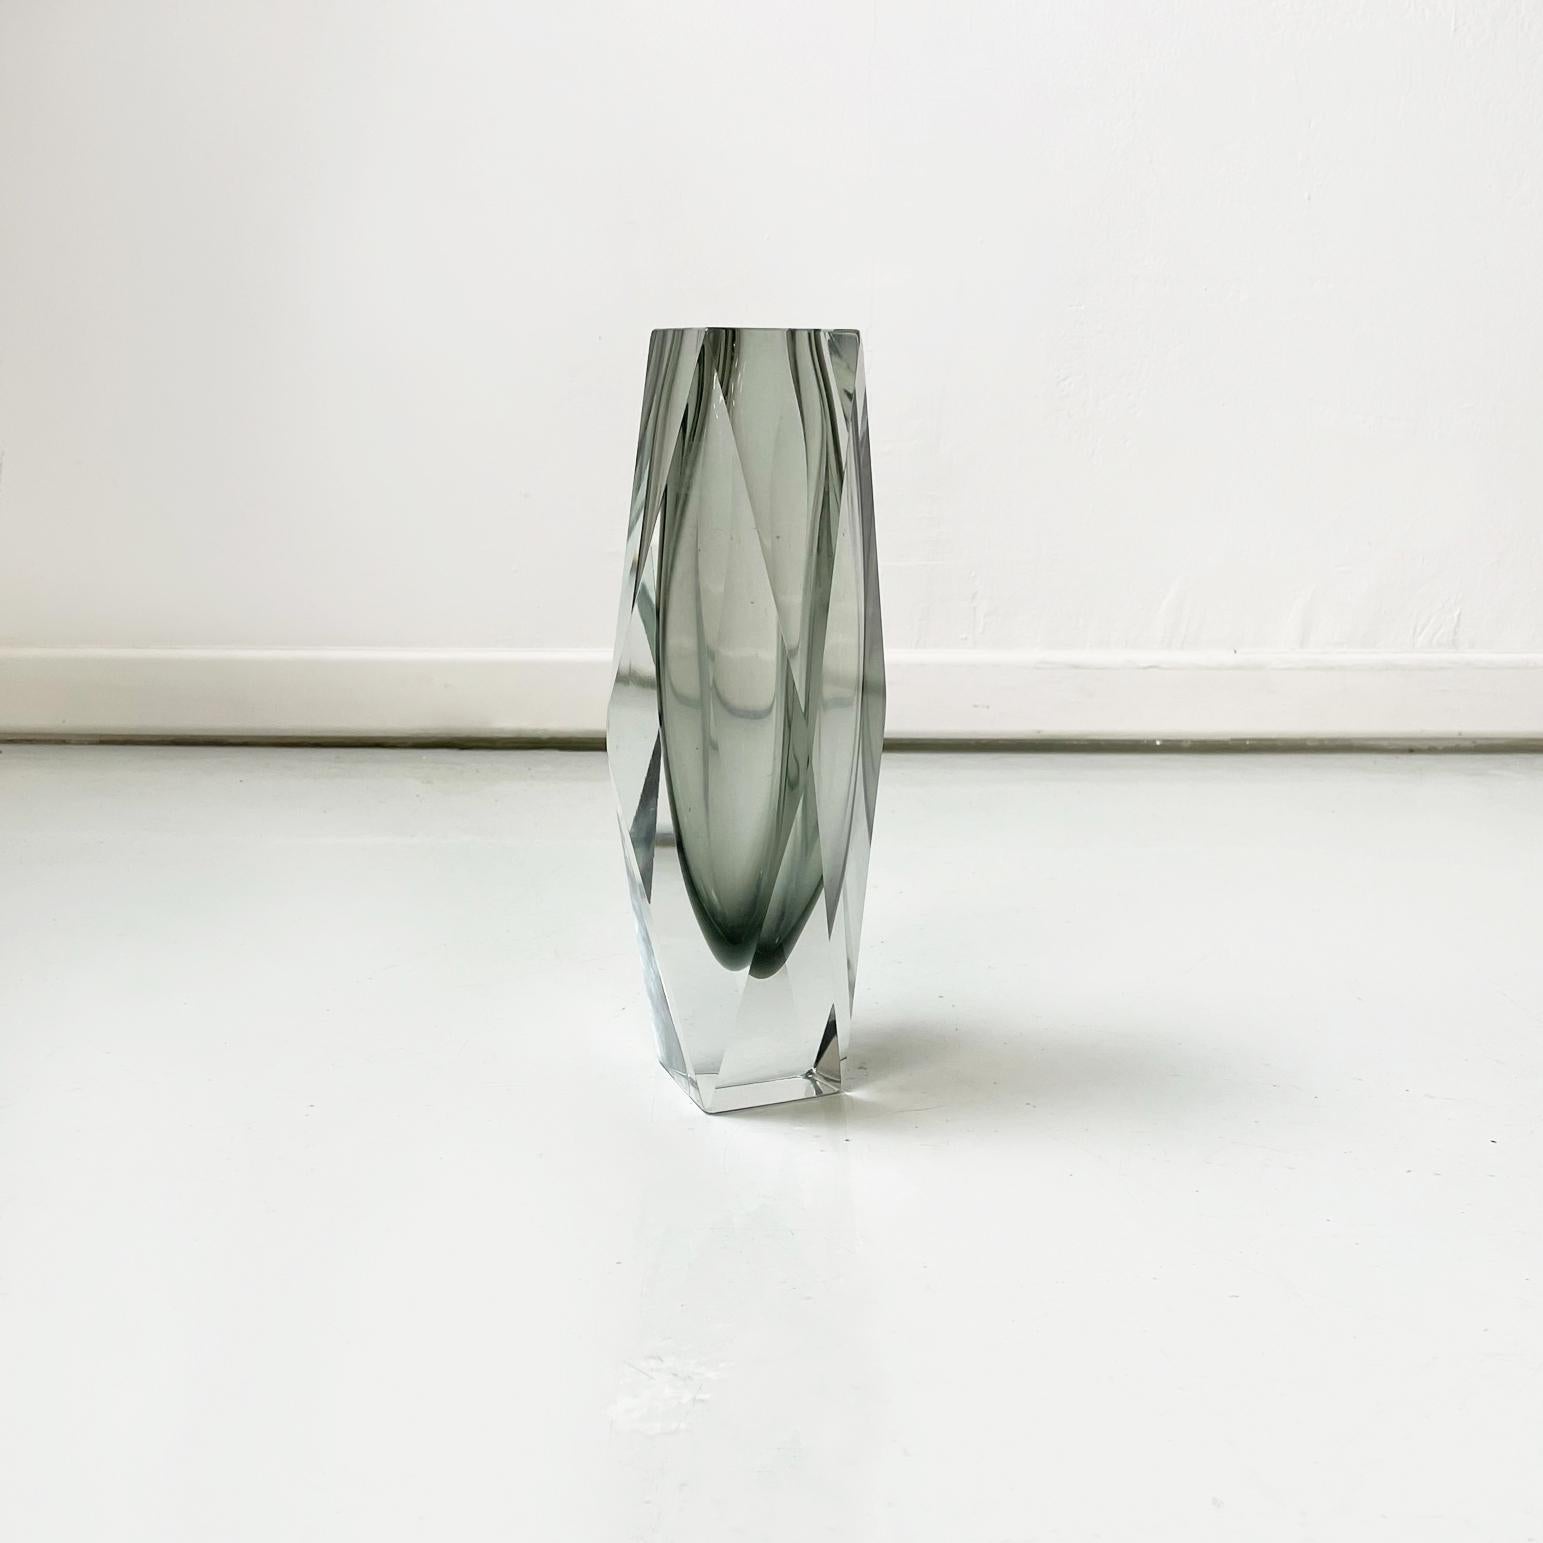 Italian modern vase in gray murano glass from the I Sommersi series, 1970s.
Irregularly shaped vase in gray murano glass.
1970s. From the I Sommersi series.
Very good conditions. Tiny chip at the base.
Measurements in cm 14 x 14 x 30 H
This